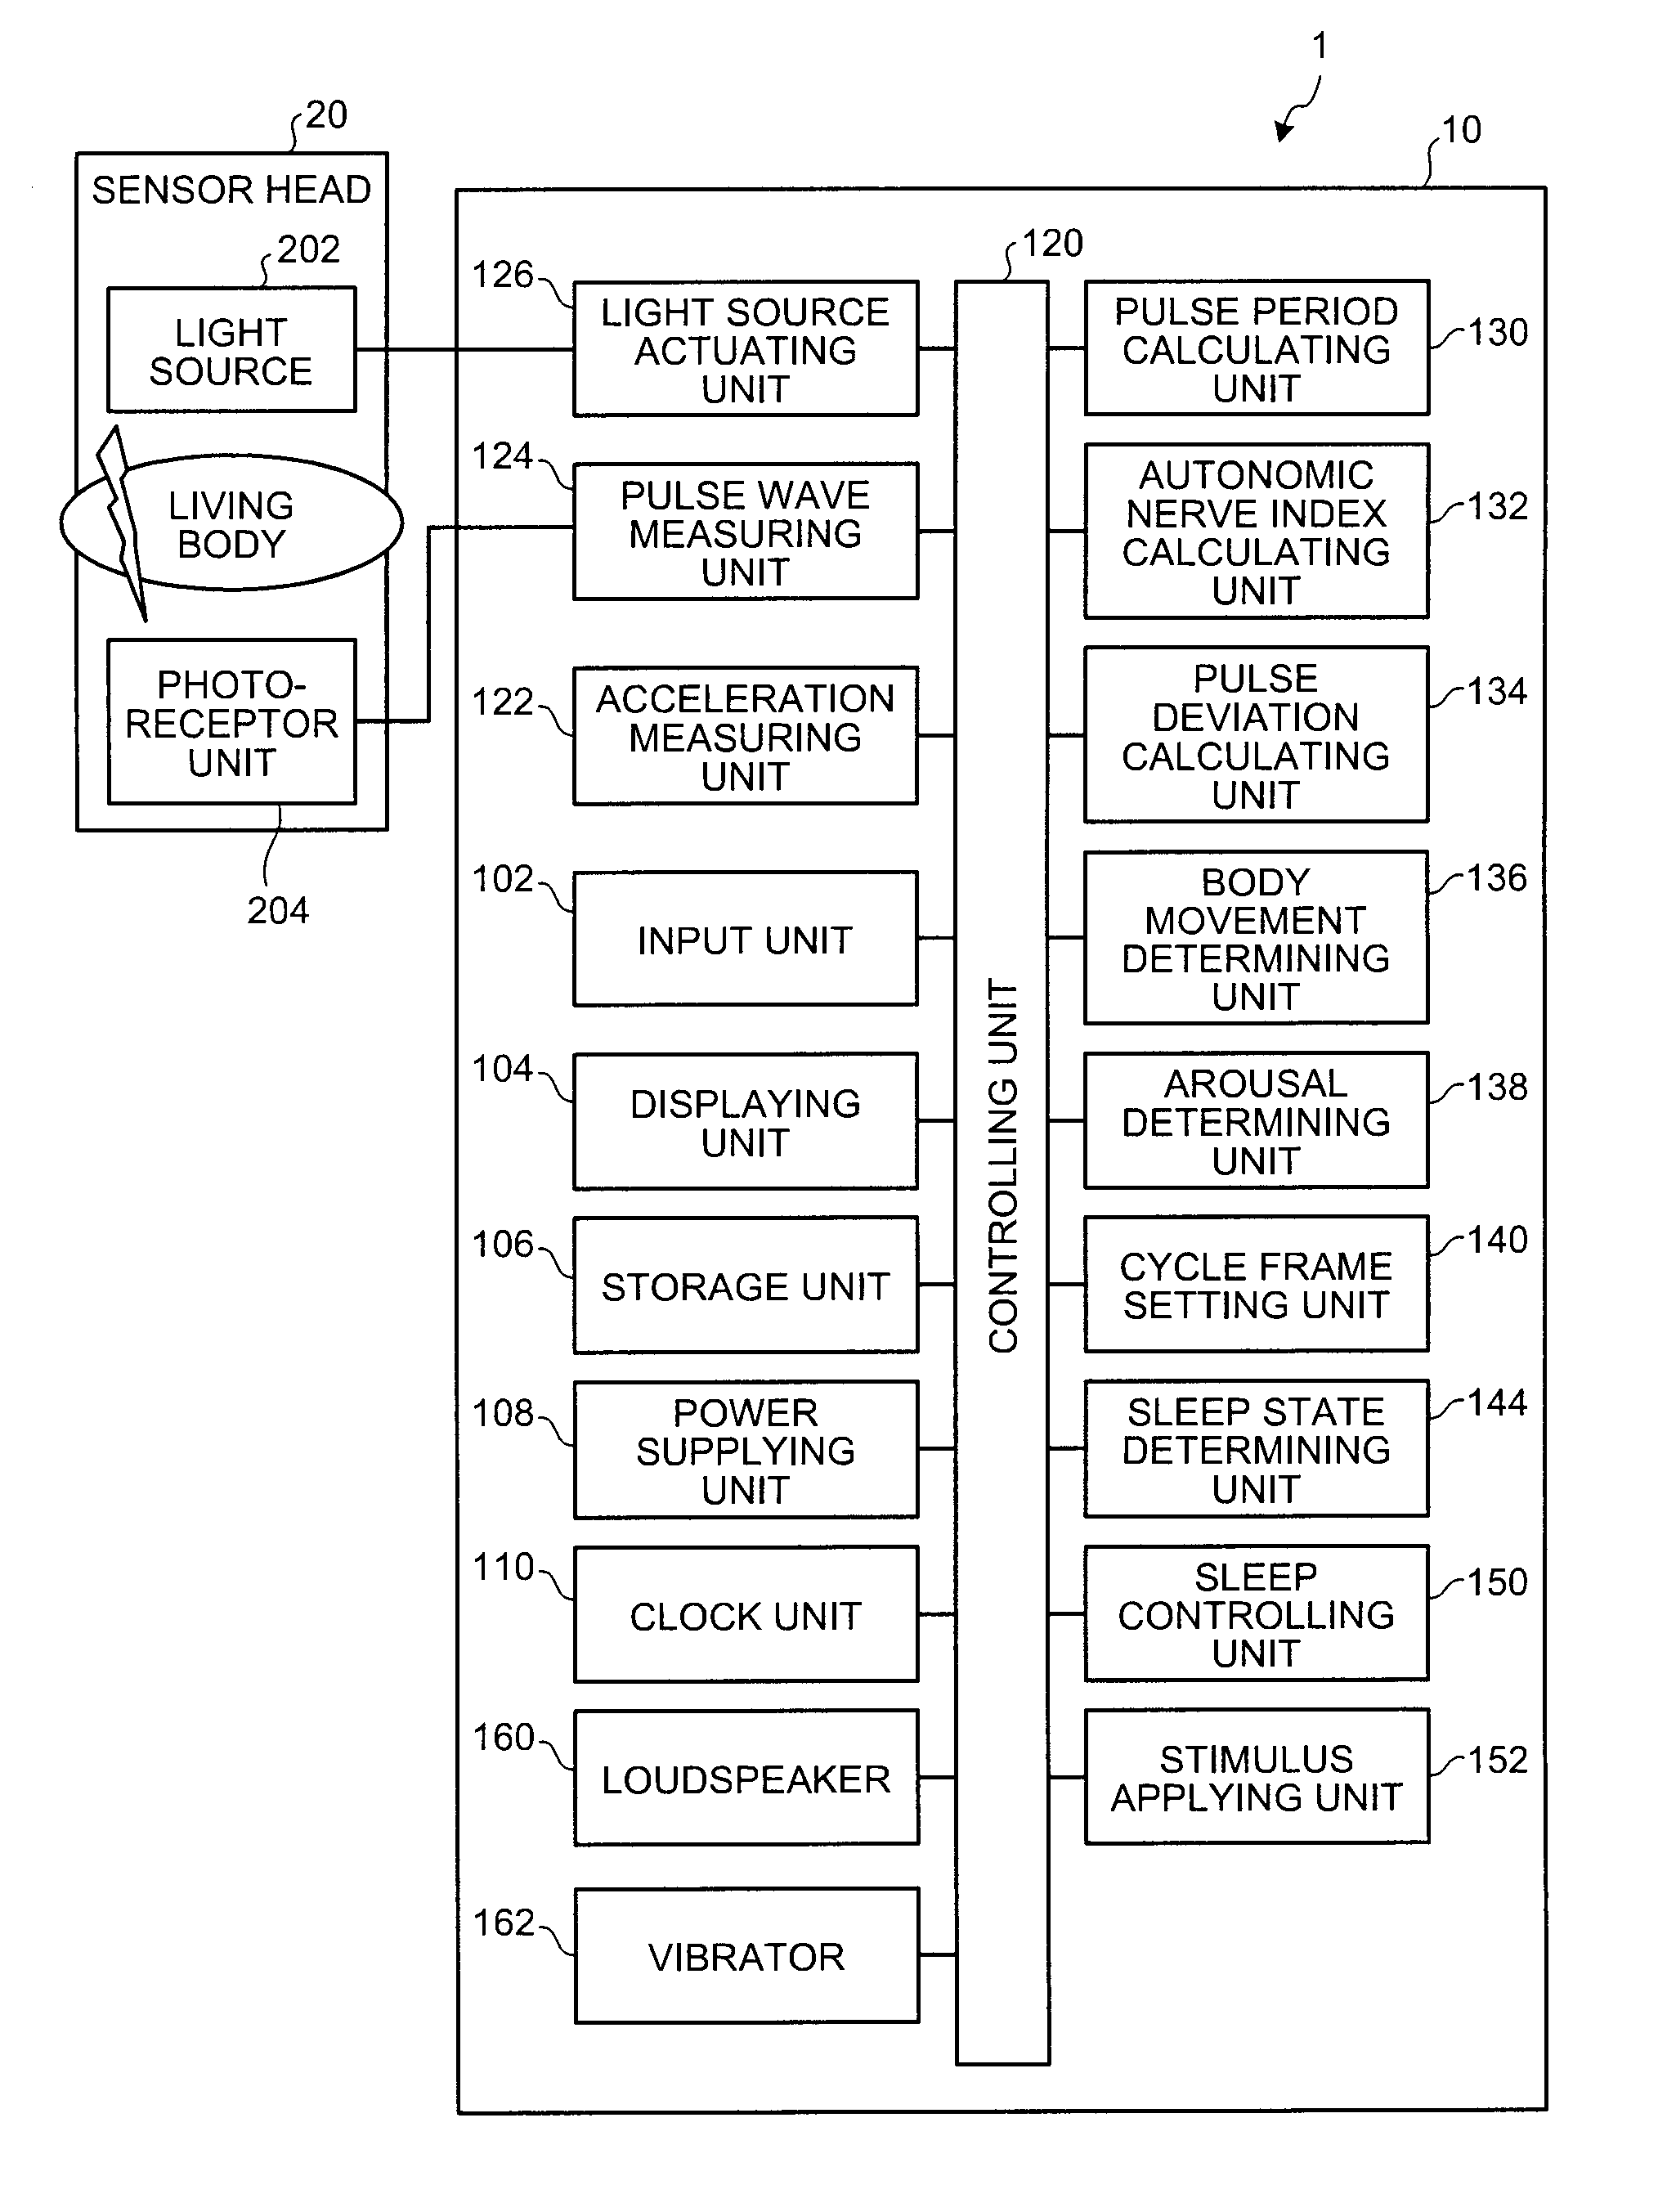 Sleep controlling apparatus and method, and computer program product thereof